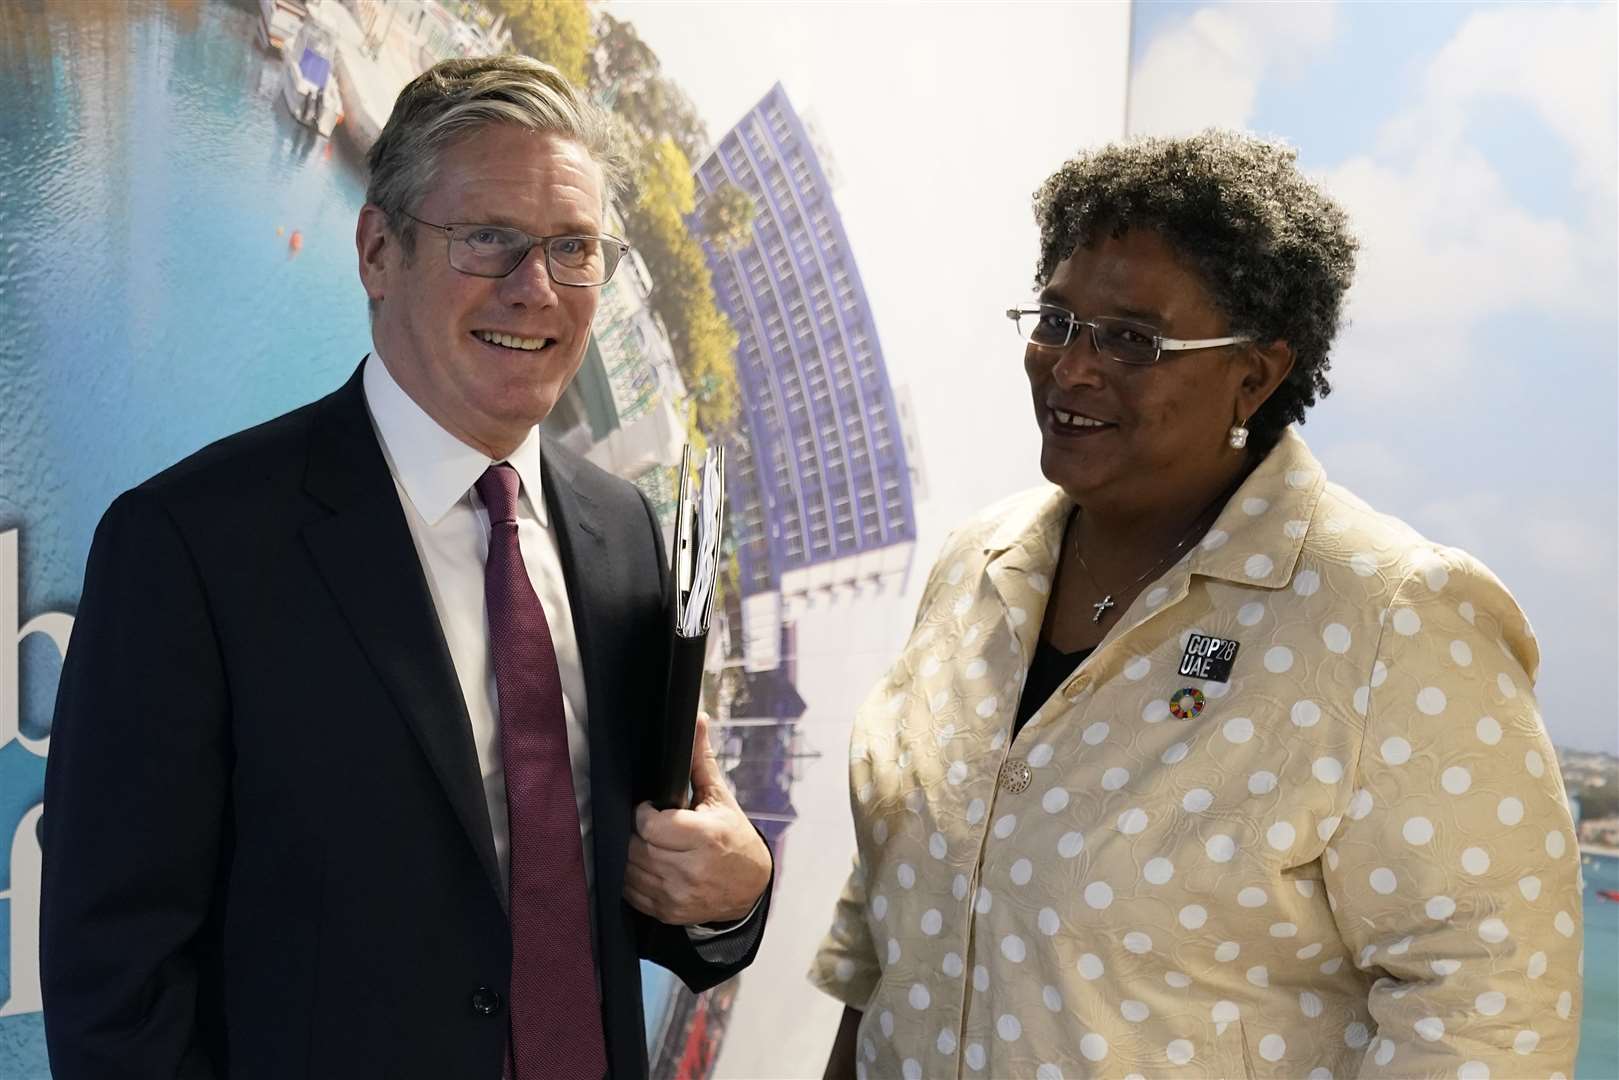 Sir Keir Starmer met Mia Mottley, Prime Minister of Barbados, during a bilateral meeting on Friday (Andrew Matthews/PA)